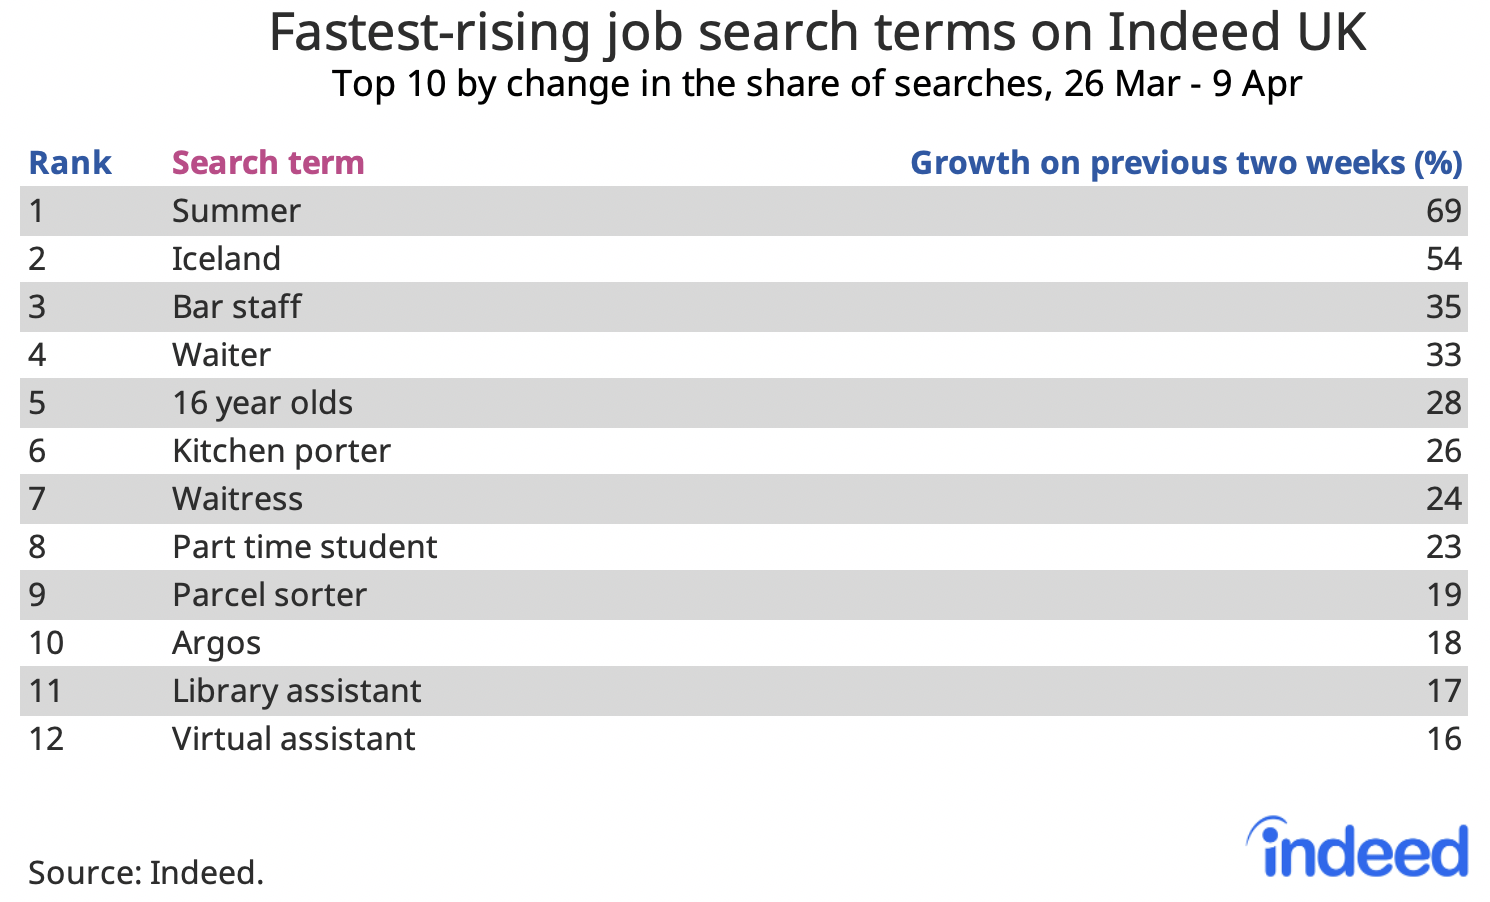 table showing fastest-rising job search terms on Indeed UK